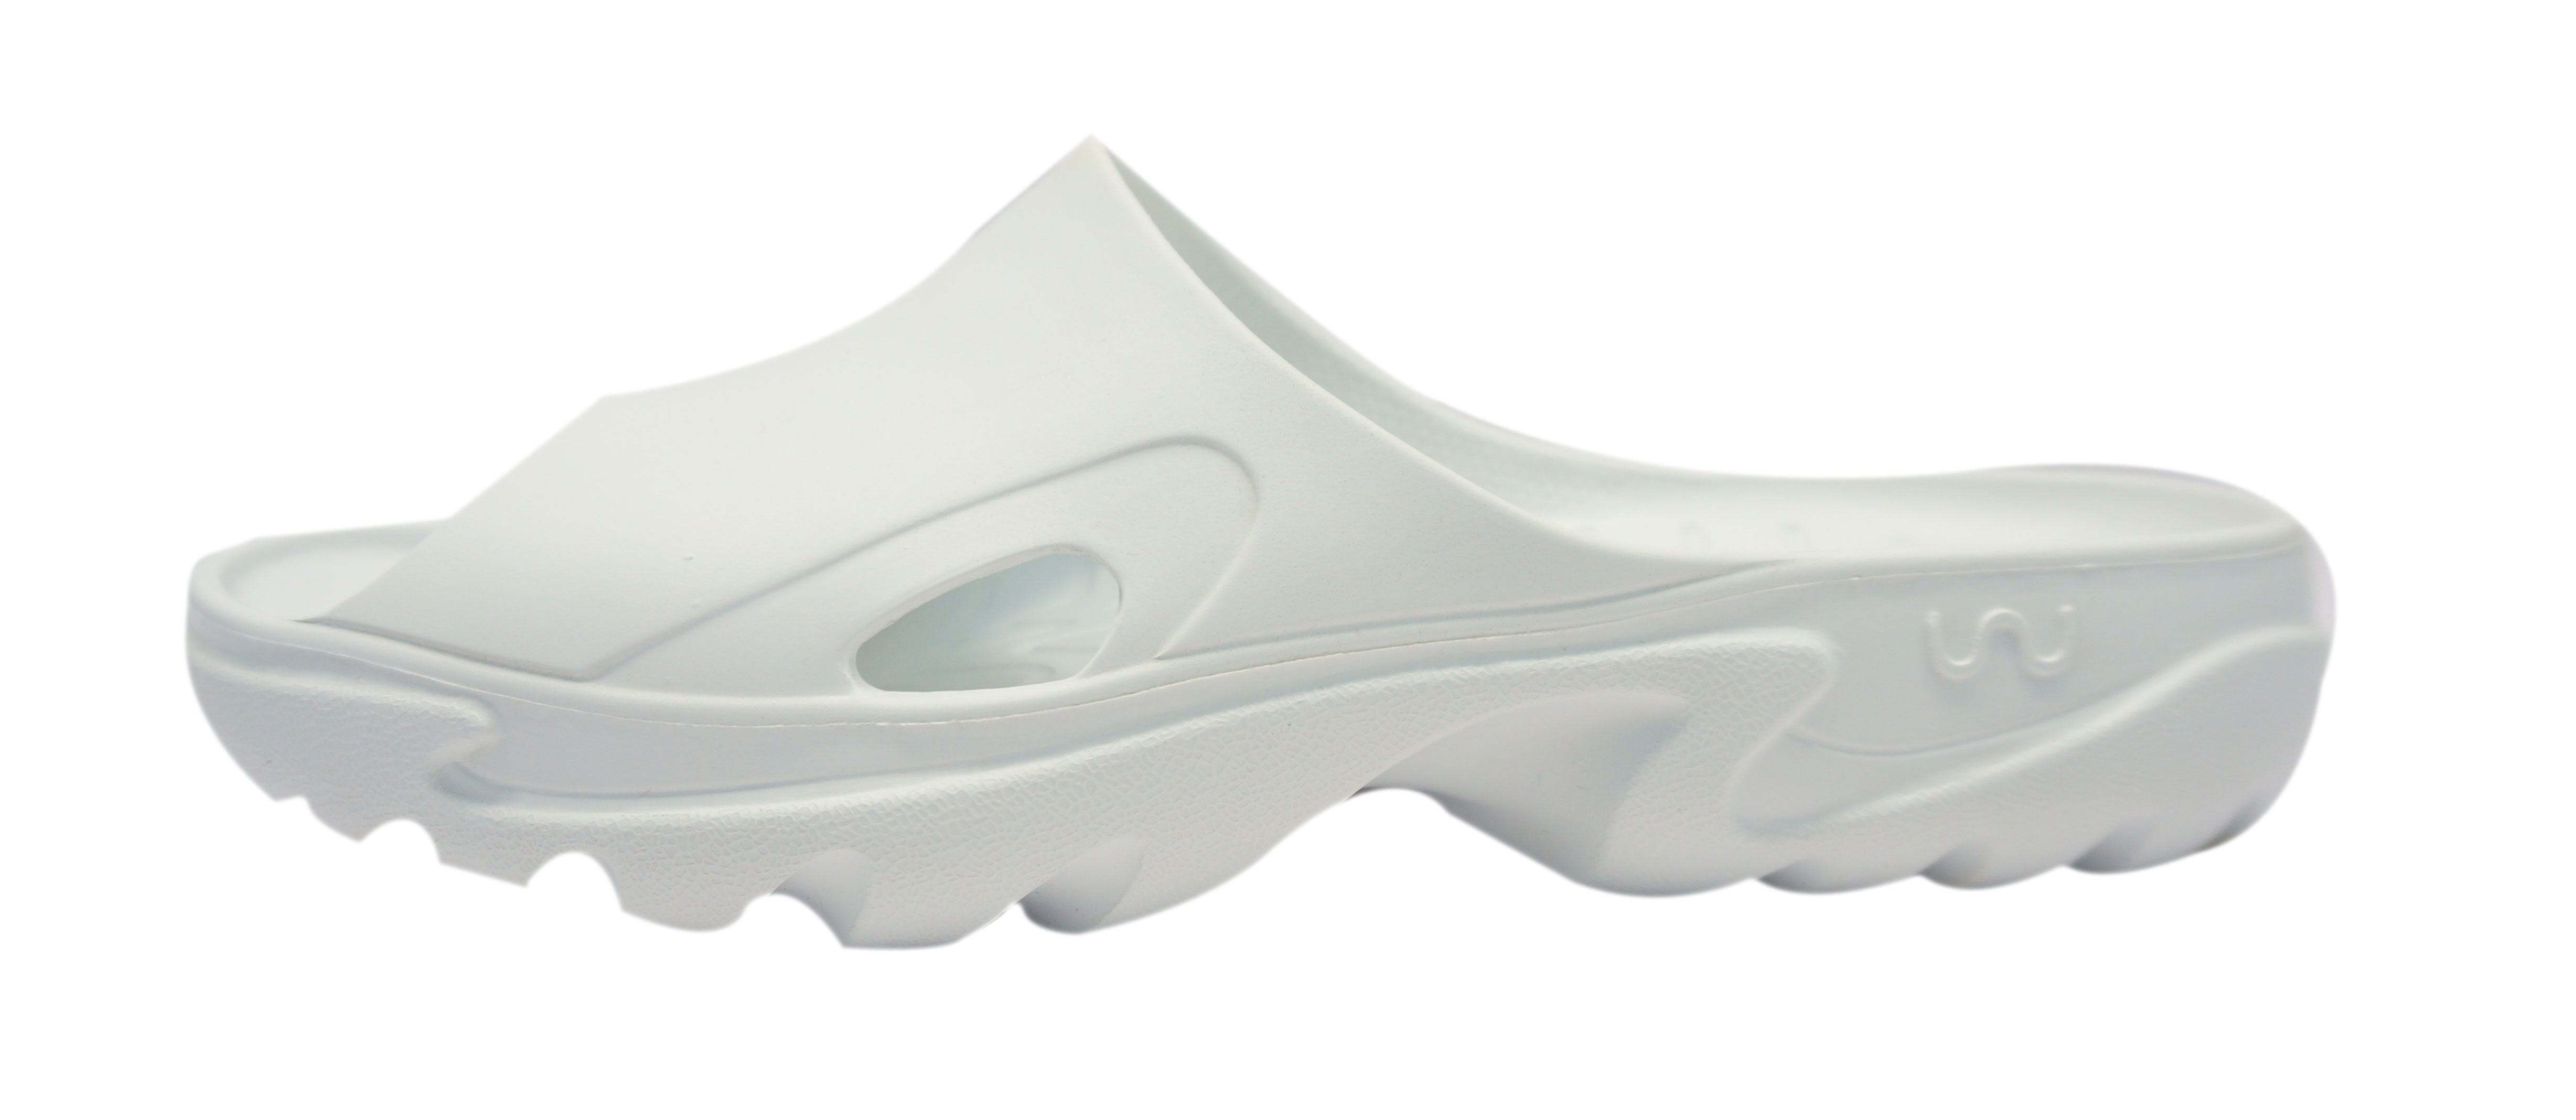 Doubleu Roma Slider for Men Comfortable Recovery Footwear (Does Not Shrink) (White)